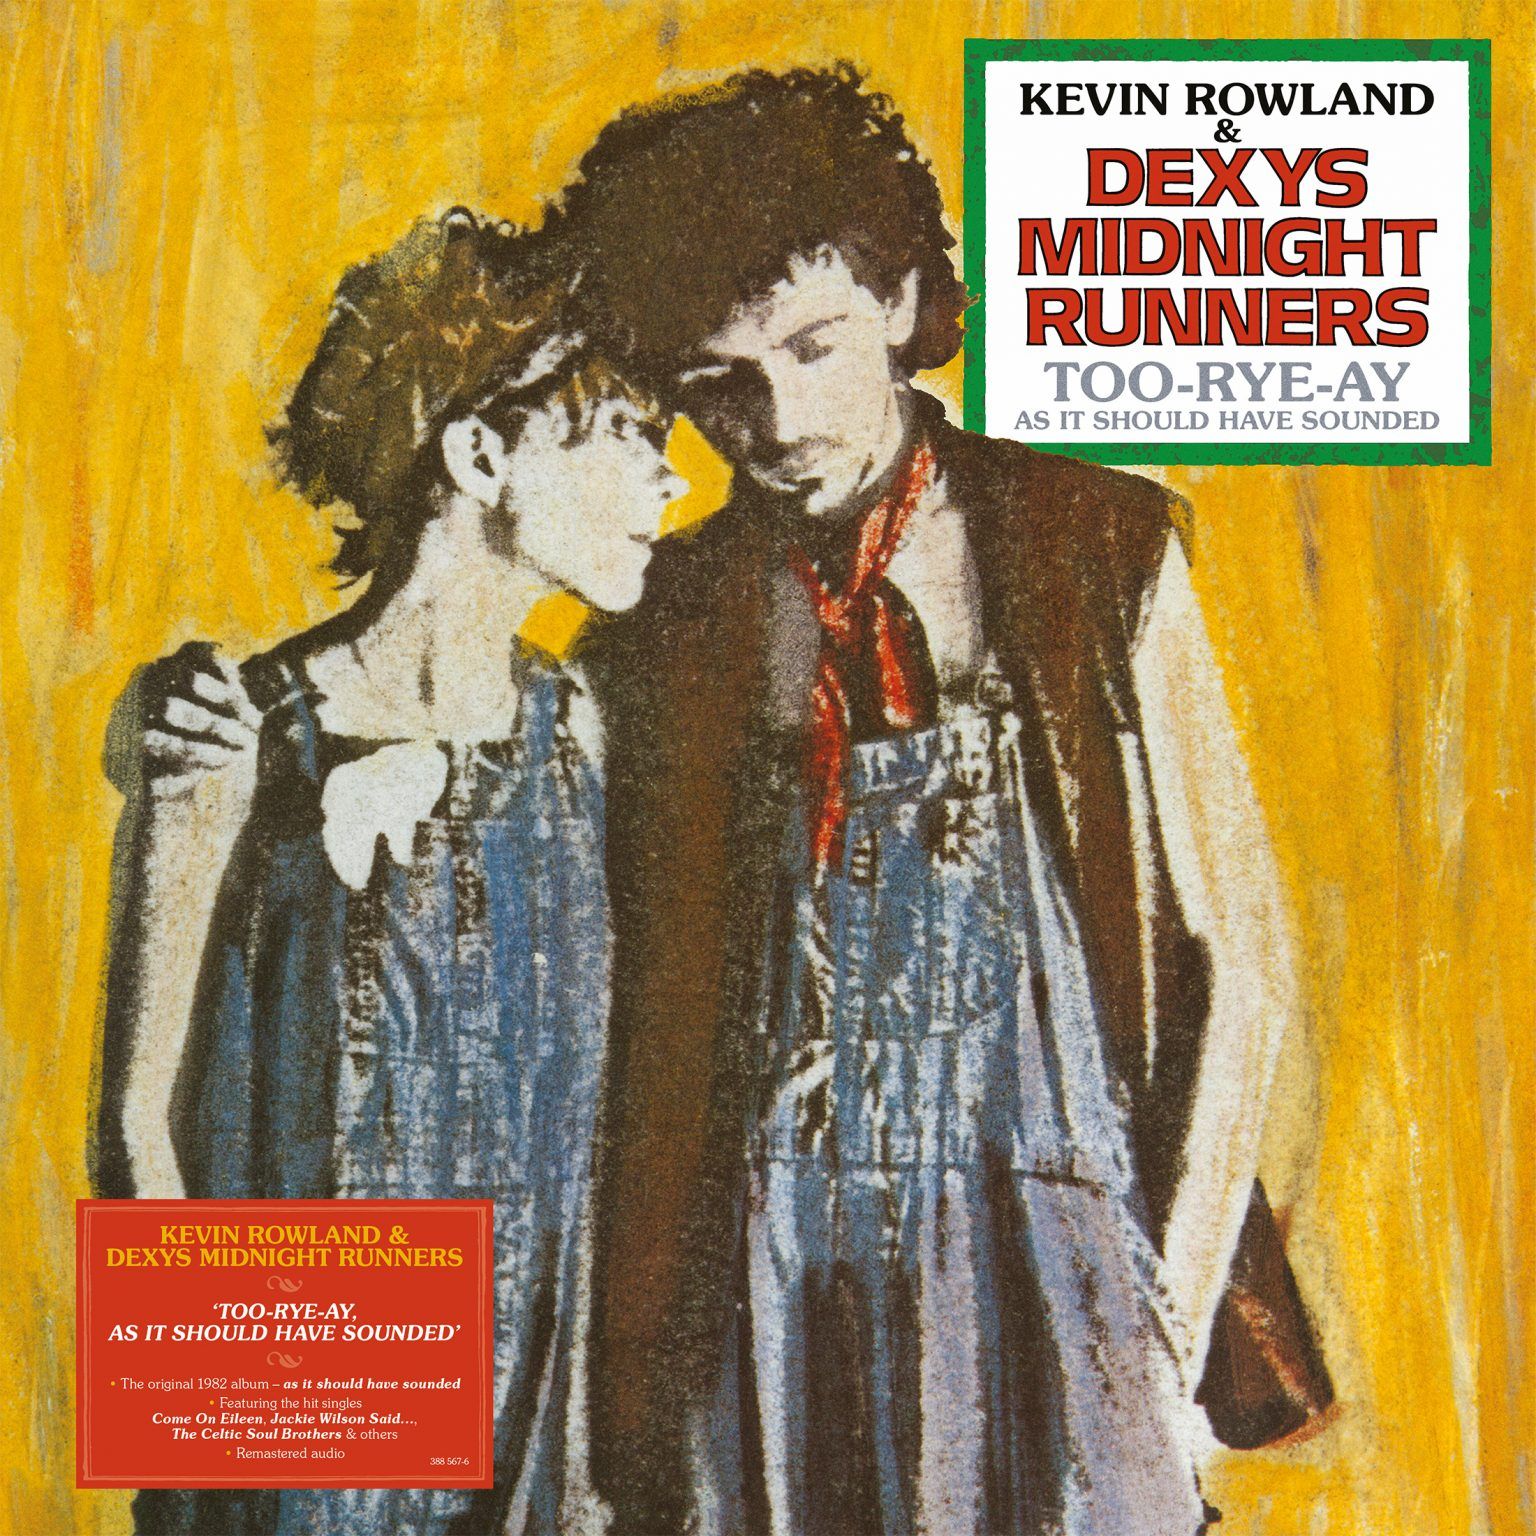 Kevin Rowland and Dexys Midnight Runners Too-Rye-Ay Cover with sticker